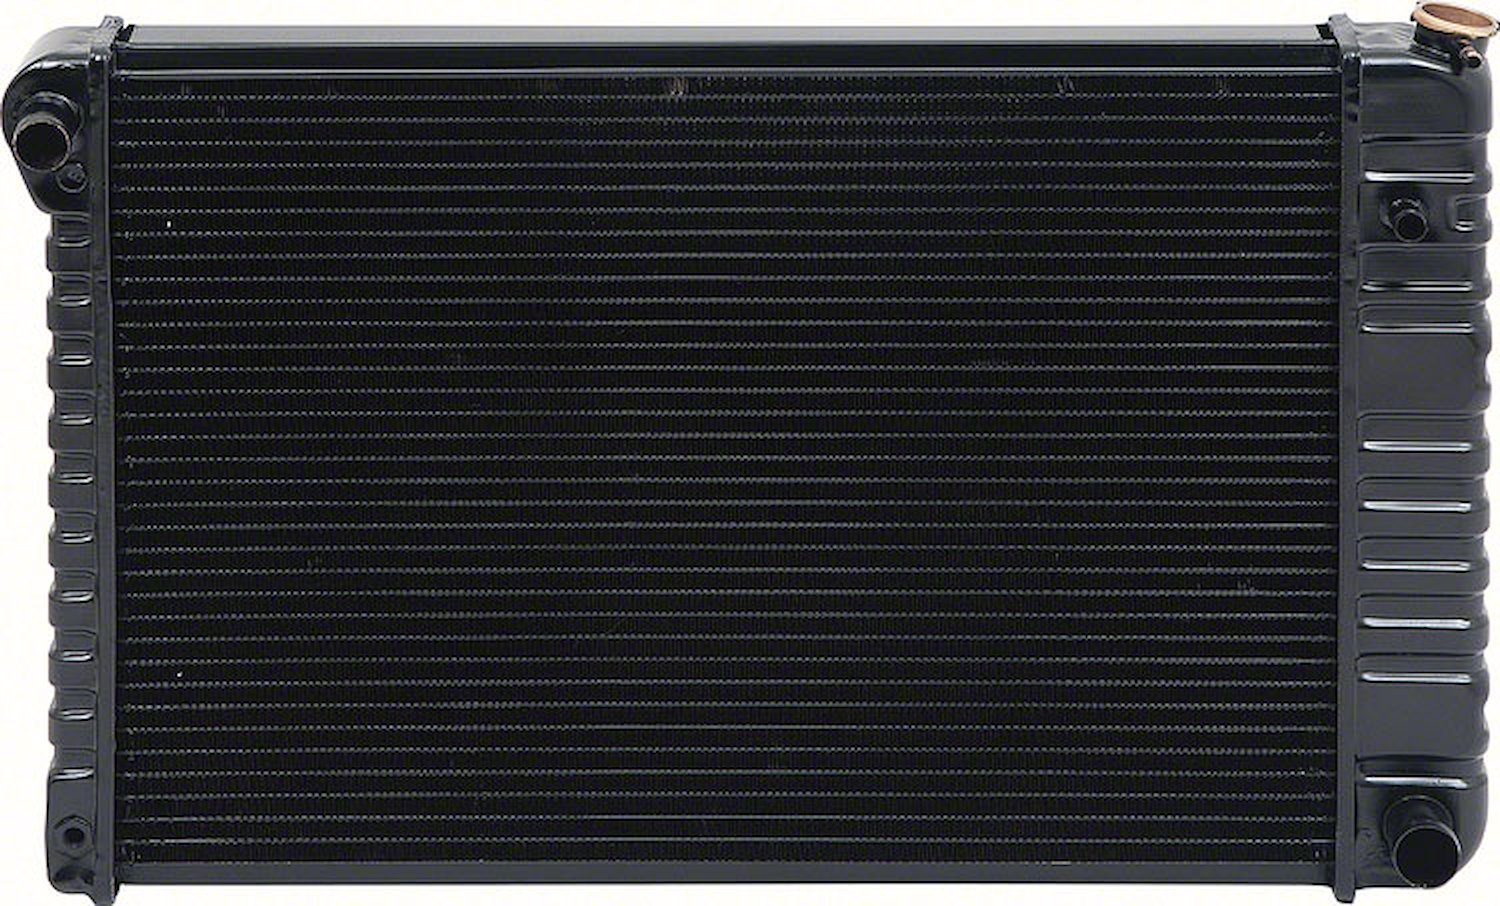 CRD1781S Radiator 1978-80 Chevrolet Truck L6 With MT 4 Row Copper/Brass (17" x 26-1/4" x 2-5/8" Core)